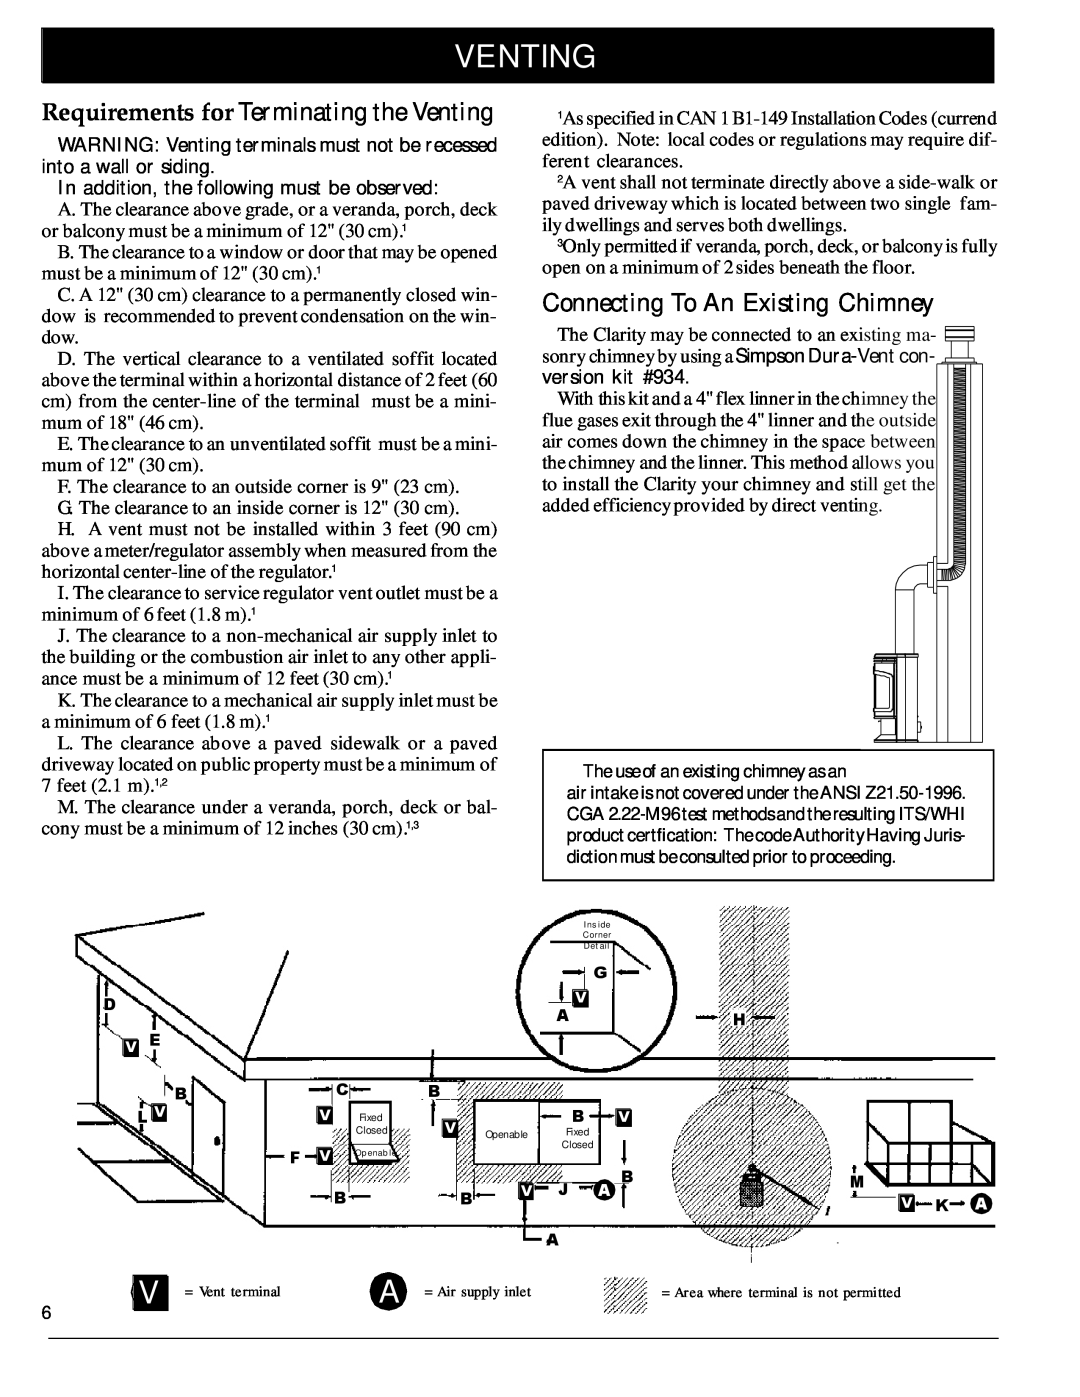 Harman Stove Company 929 DV Connecting To An Existing Chimney, Requirements for Terminating the Venting, version kit #934 